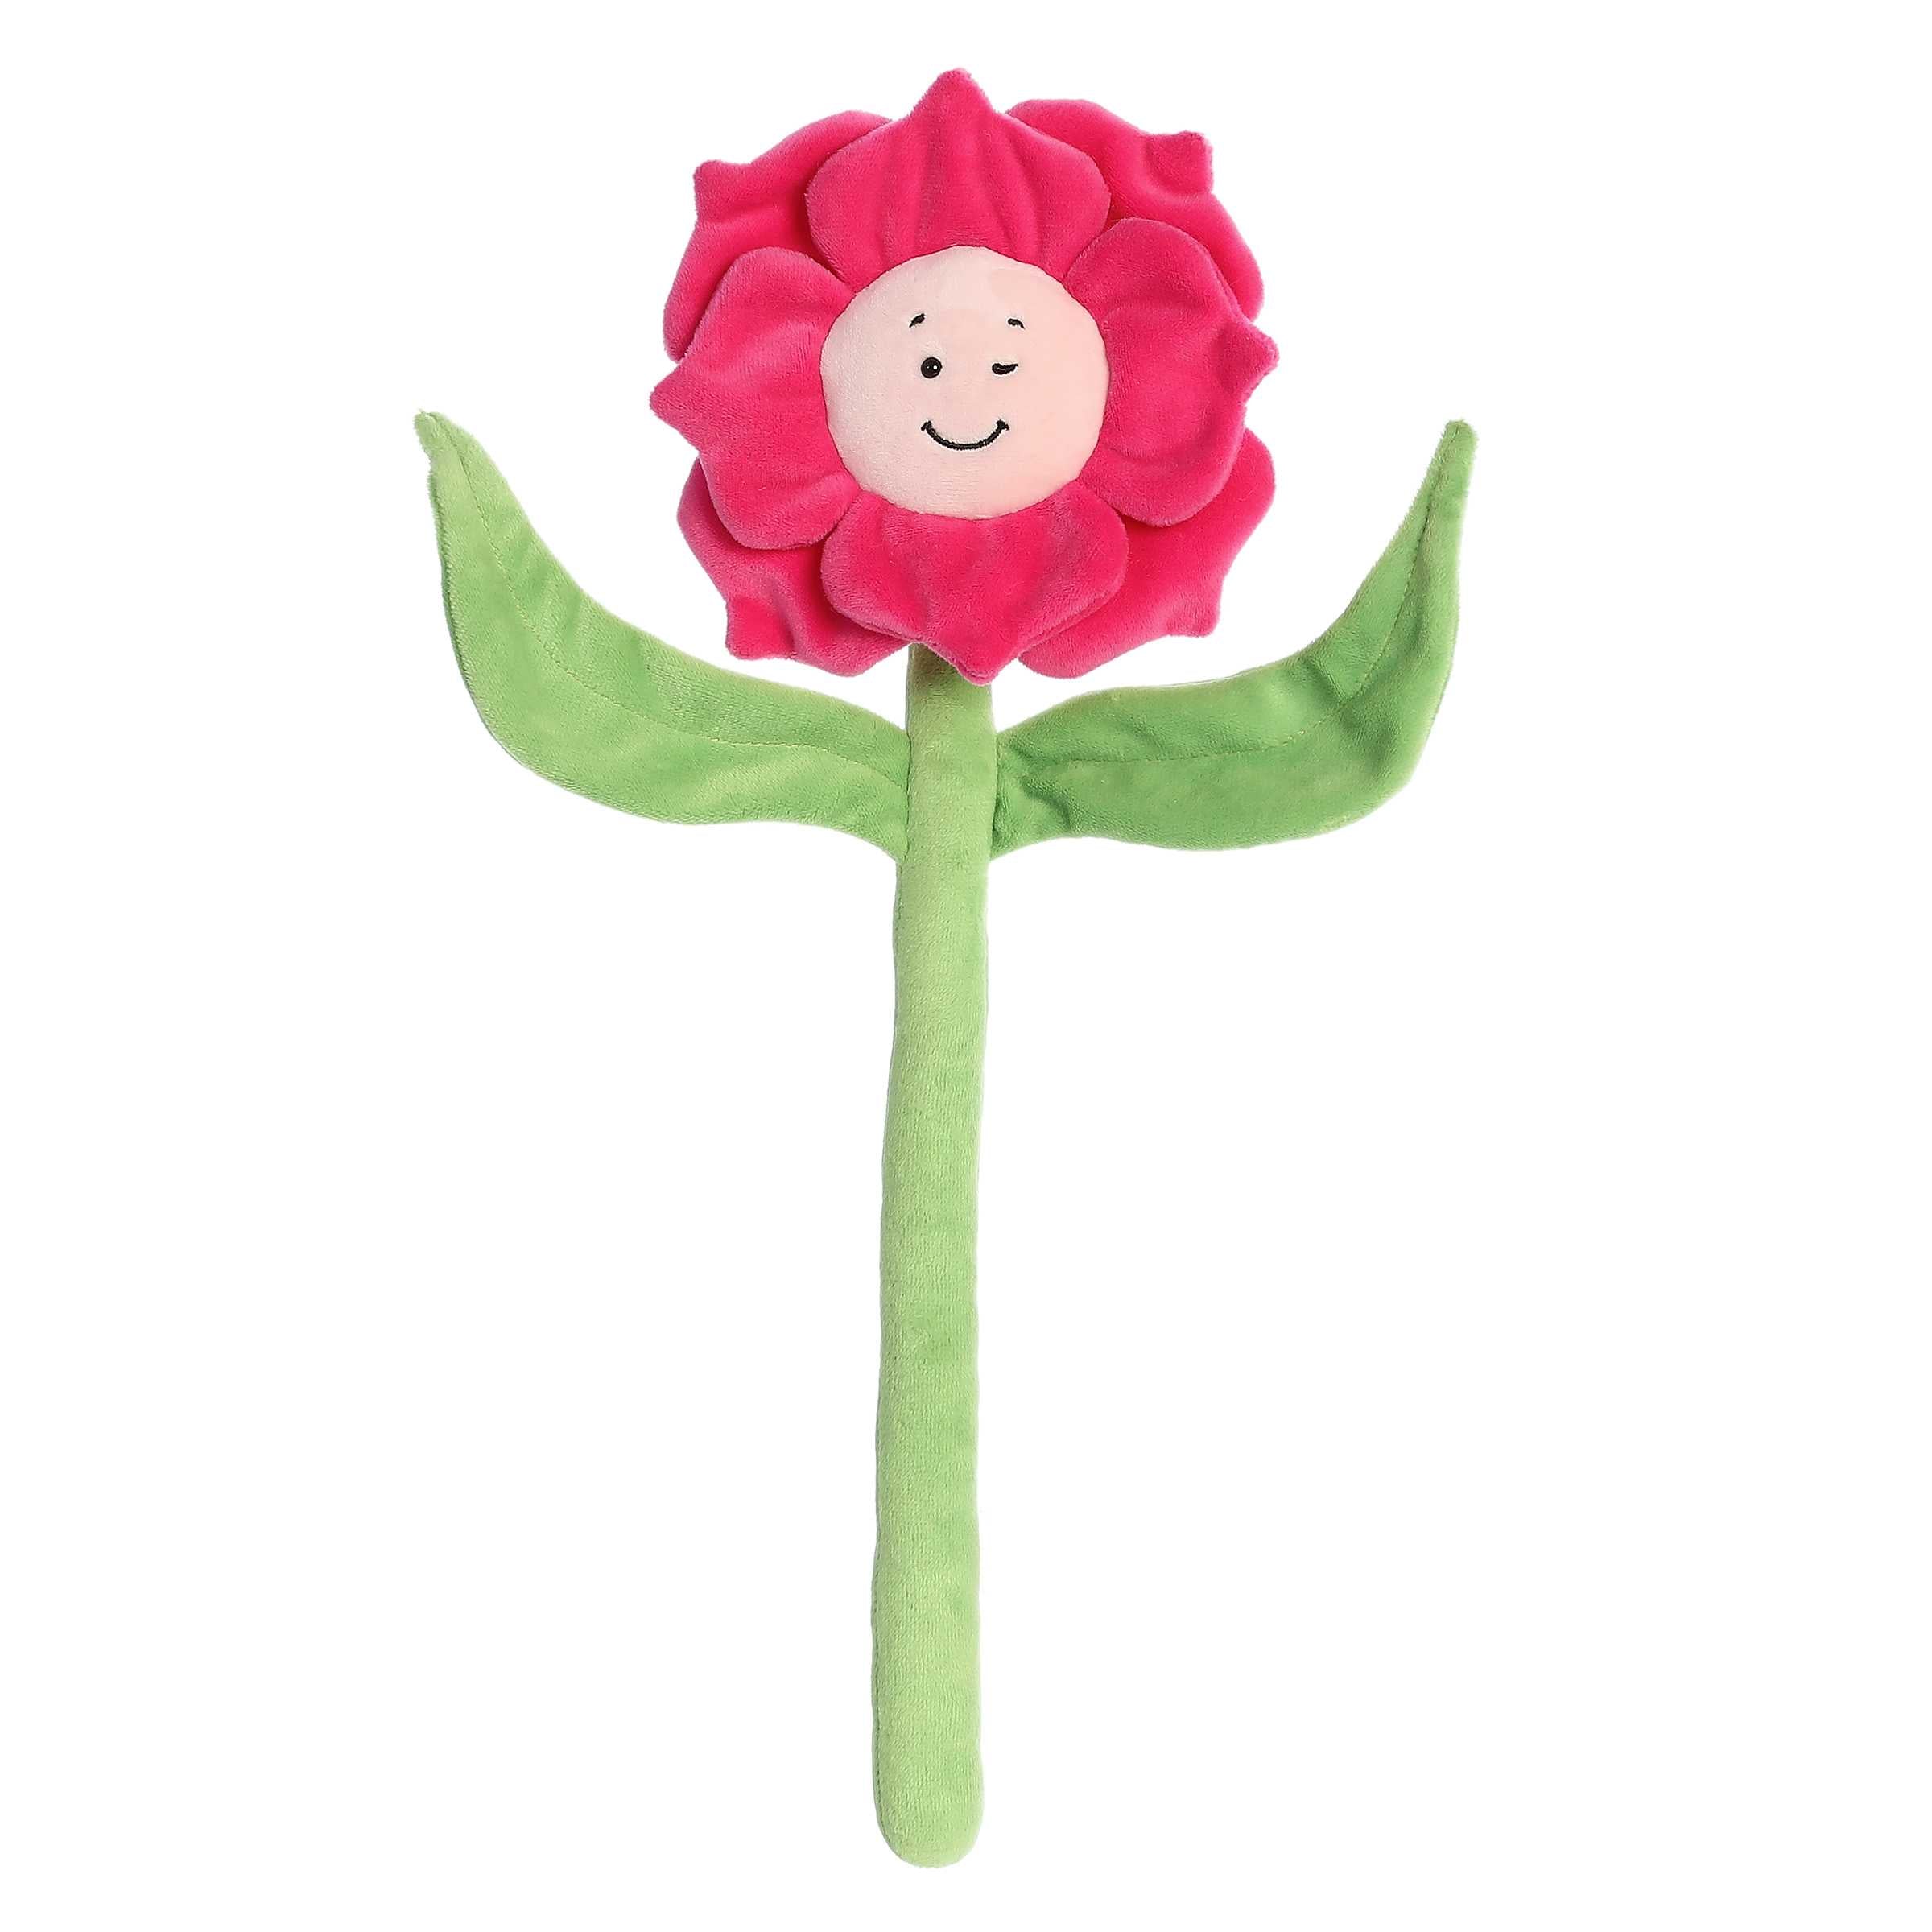 Red Poseez flower toy shaped like a posy with bendable stem, red petals, and a center featuring a playful smiling face.